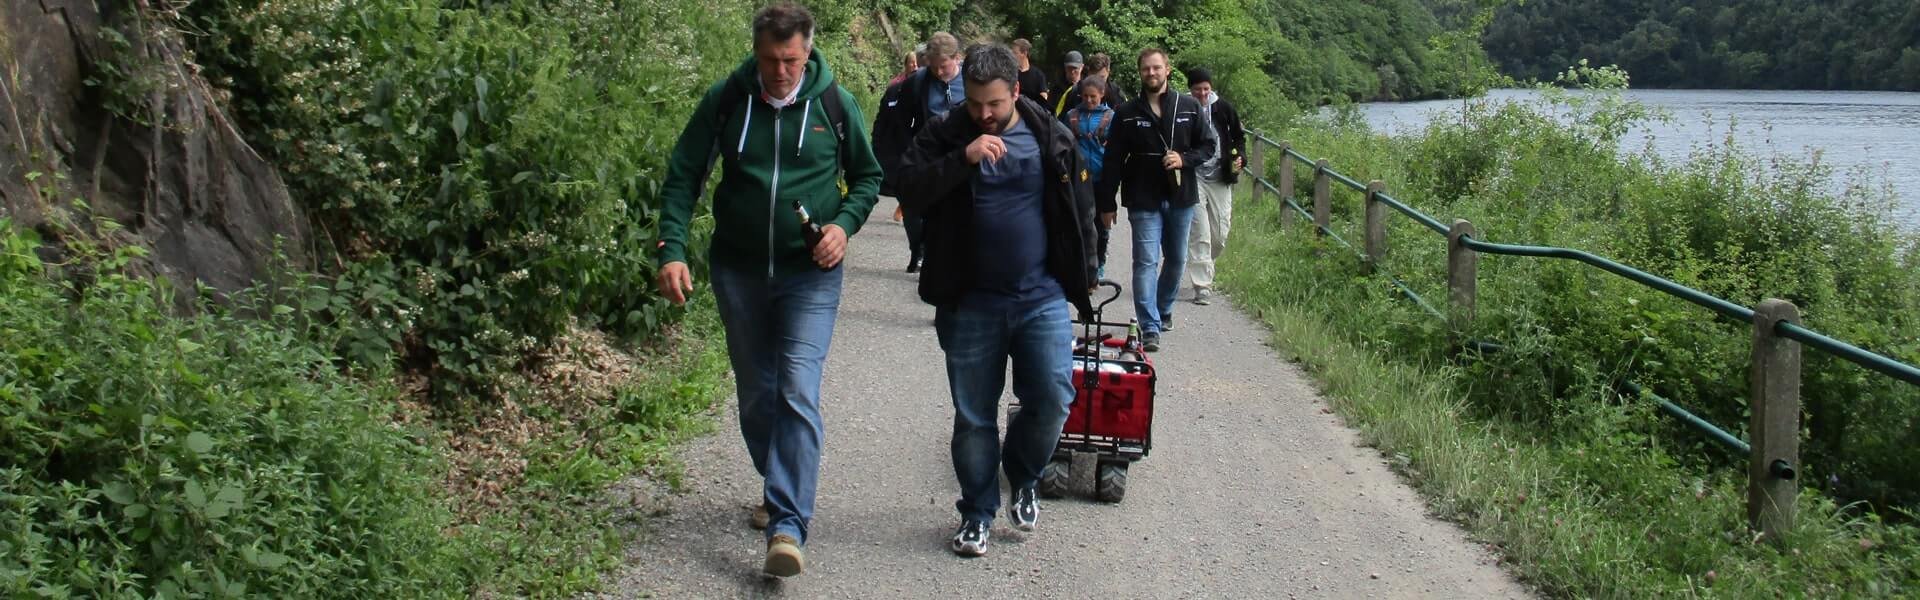 Handcart Tour of the Nibelungen through the Eifel. Company outing idea with history and action from b-ceed.